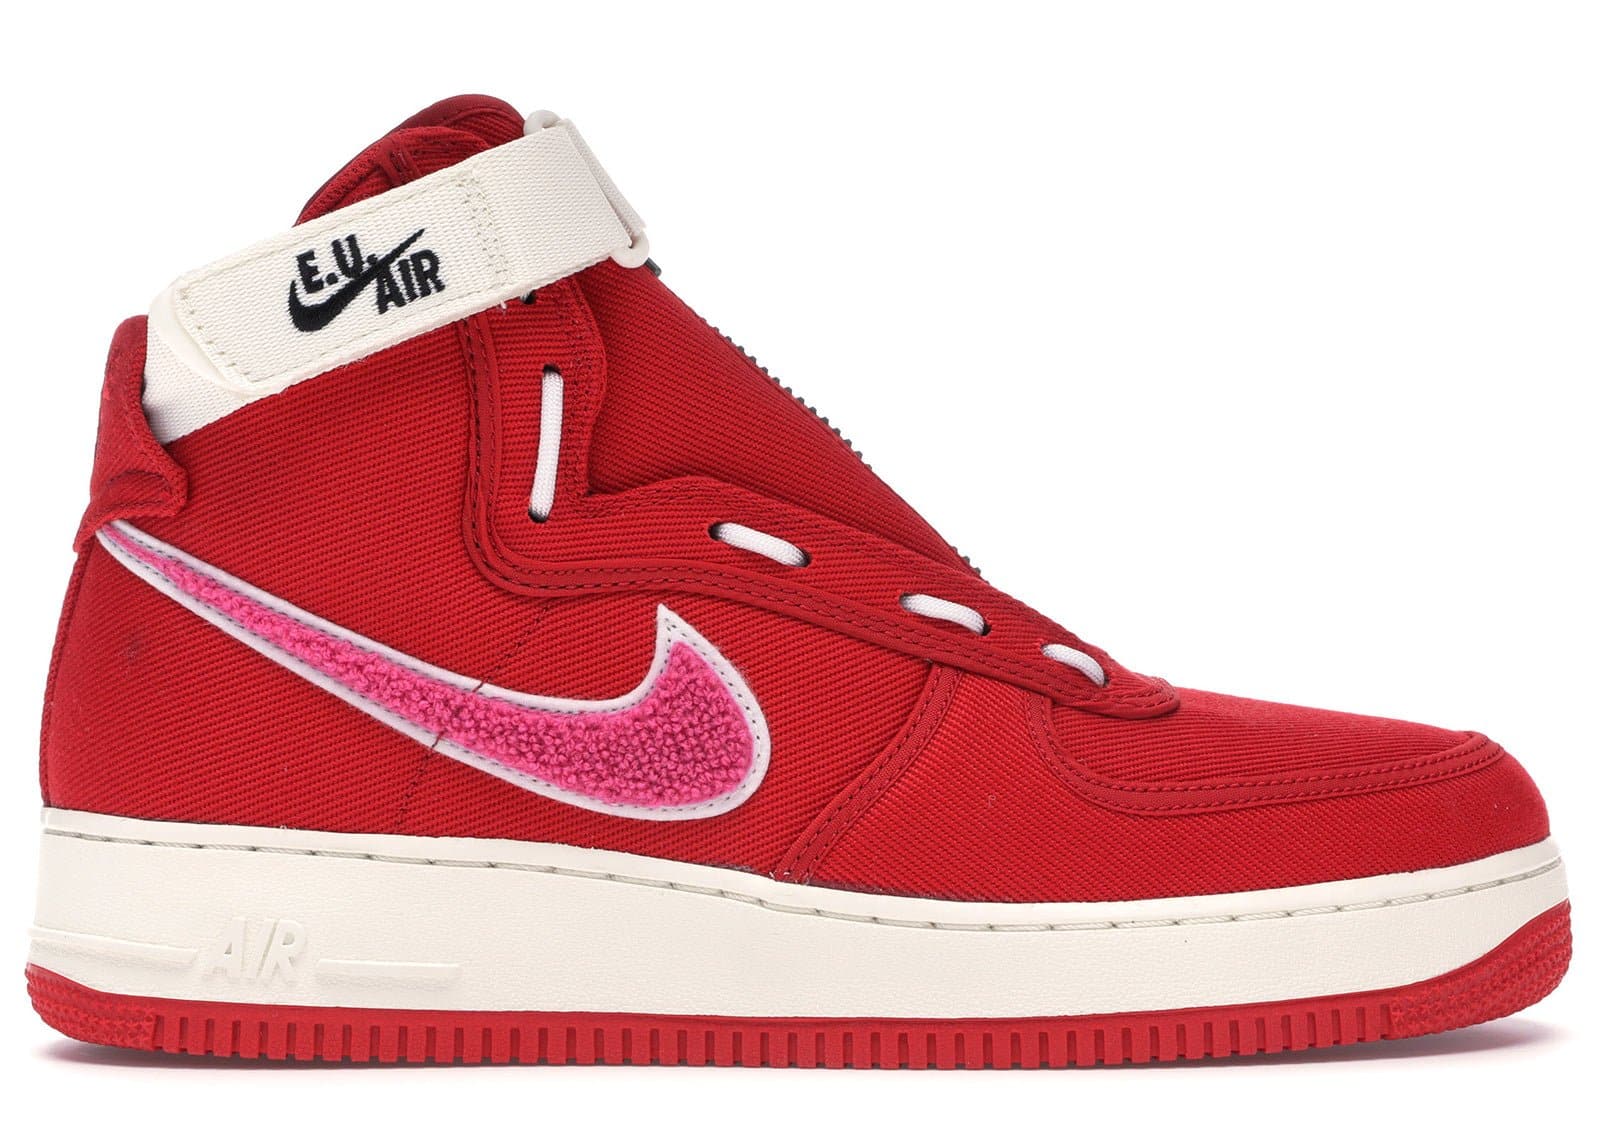 Nike Air Force 1 High Emotionally Unavailable - The Magnolia Park